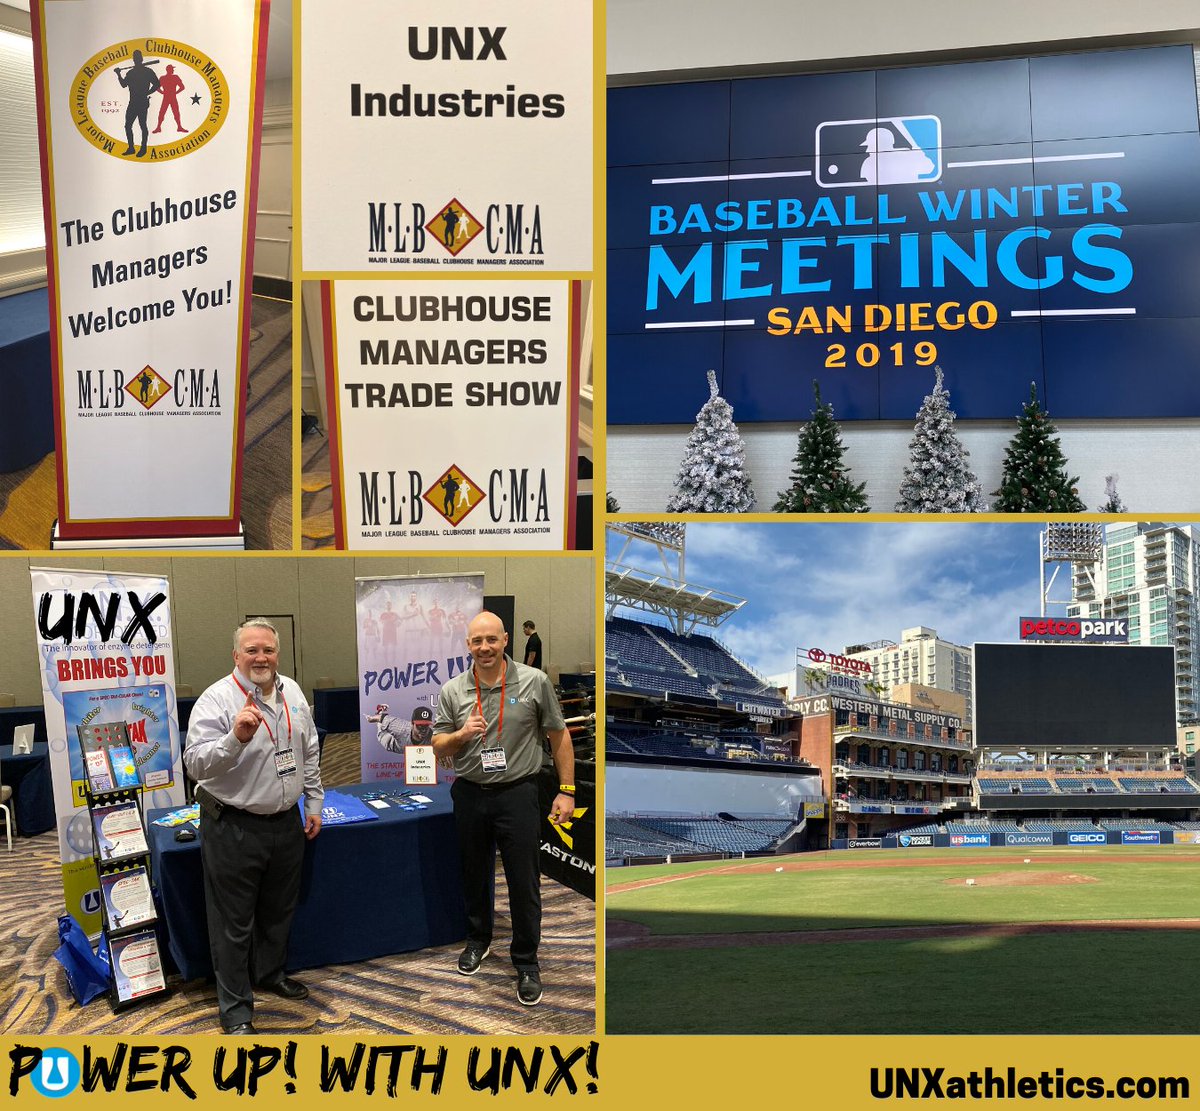 We're excited to be at the 2019 #MLBWinterMeetings in #SanDiego! Looking forward to a great trade show! #UNXathletics #PowerUp #ThisIsUNX #UNXclean #SpecTak #SpecTakClean #ClayOut #OneTeamOneDream